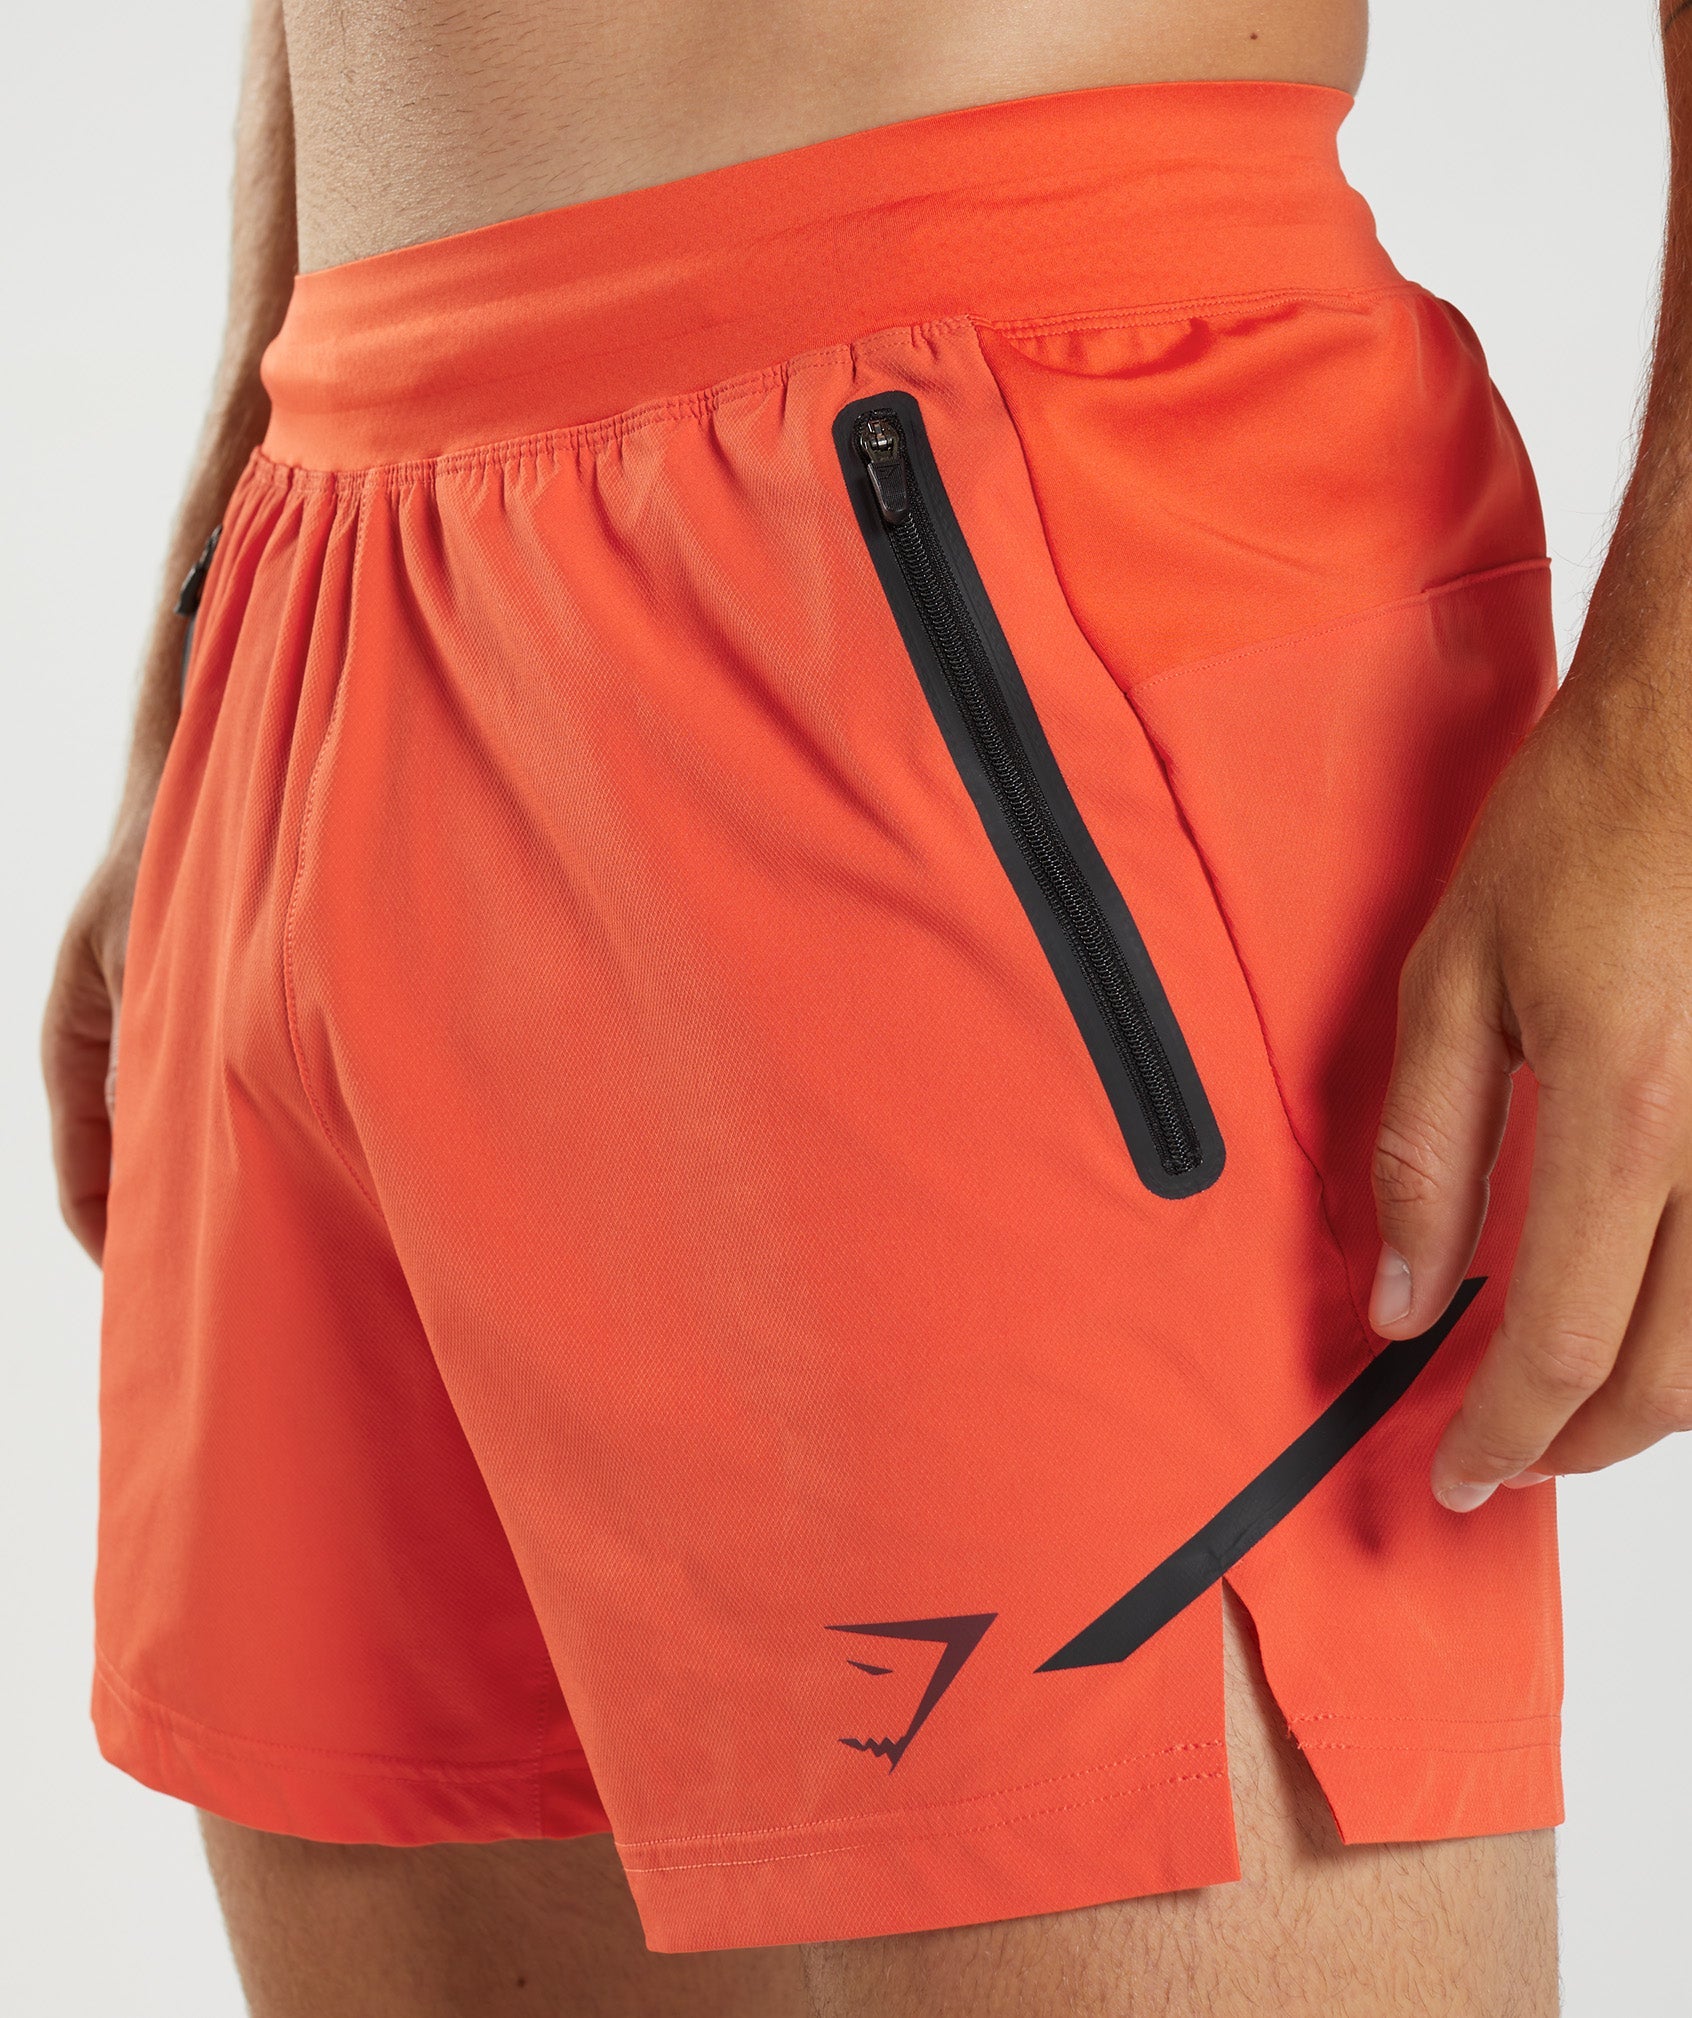 Apex 5" Perform Shorts in Pepper Red - view 6